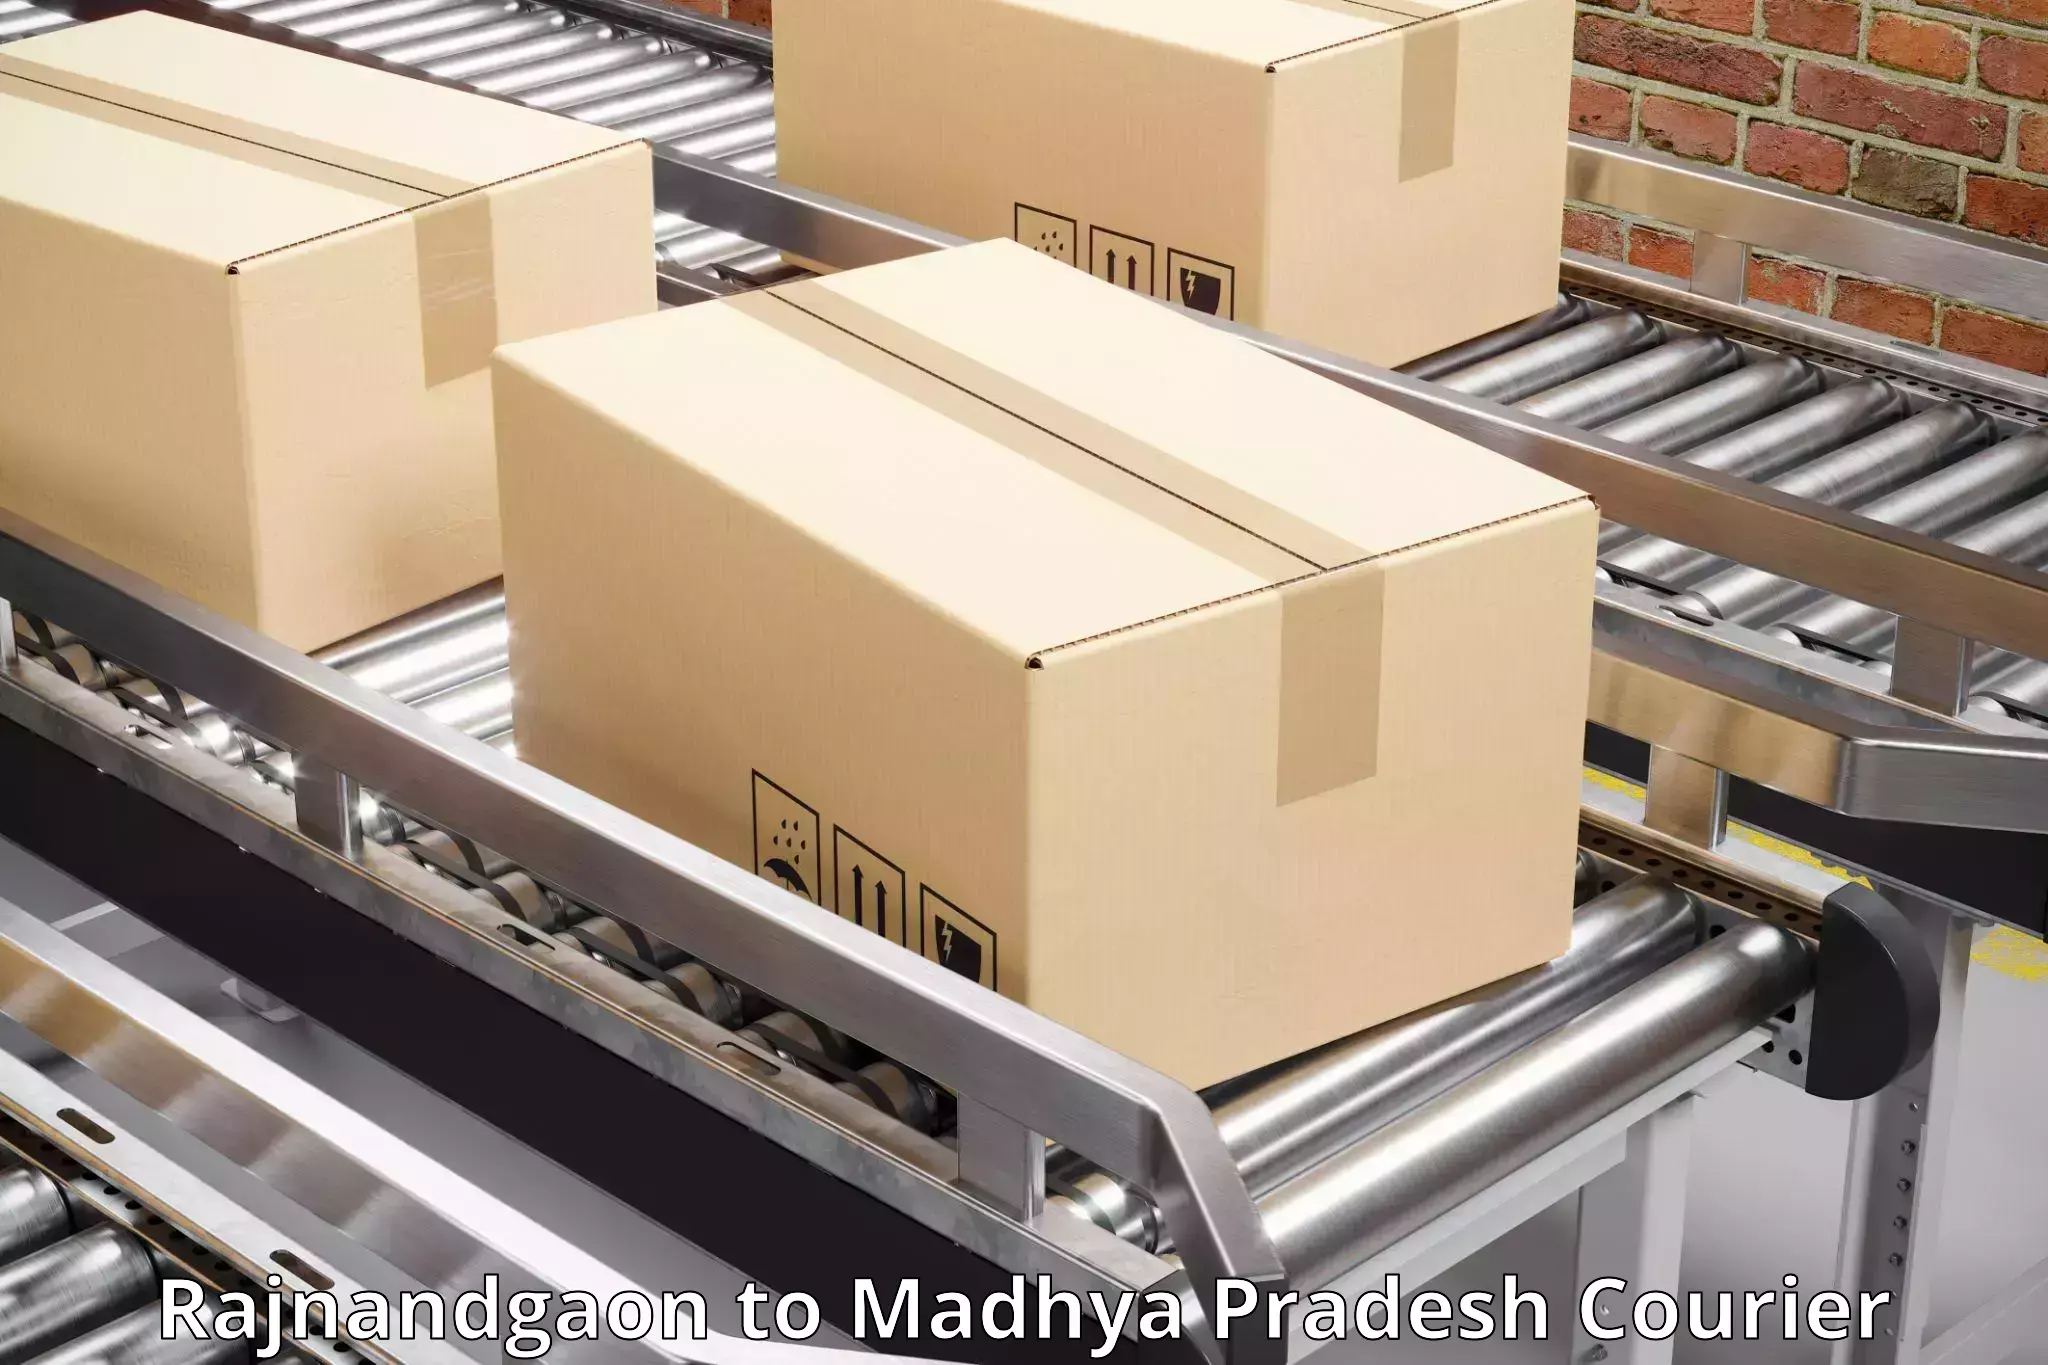 Modern courier technology in Rajnandgaon to Chanderi